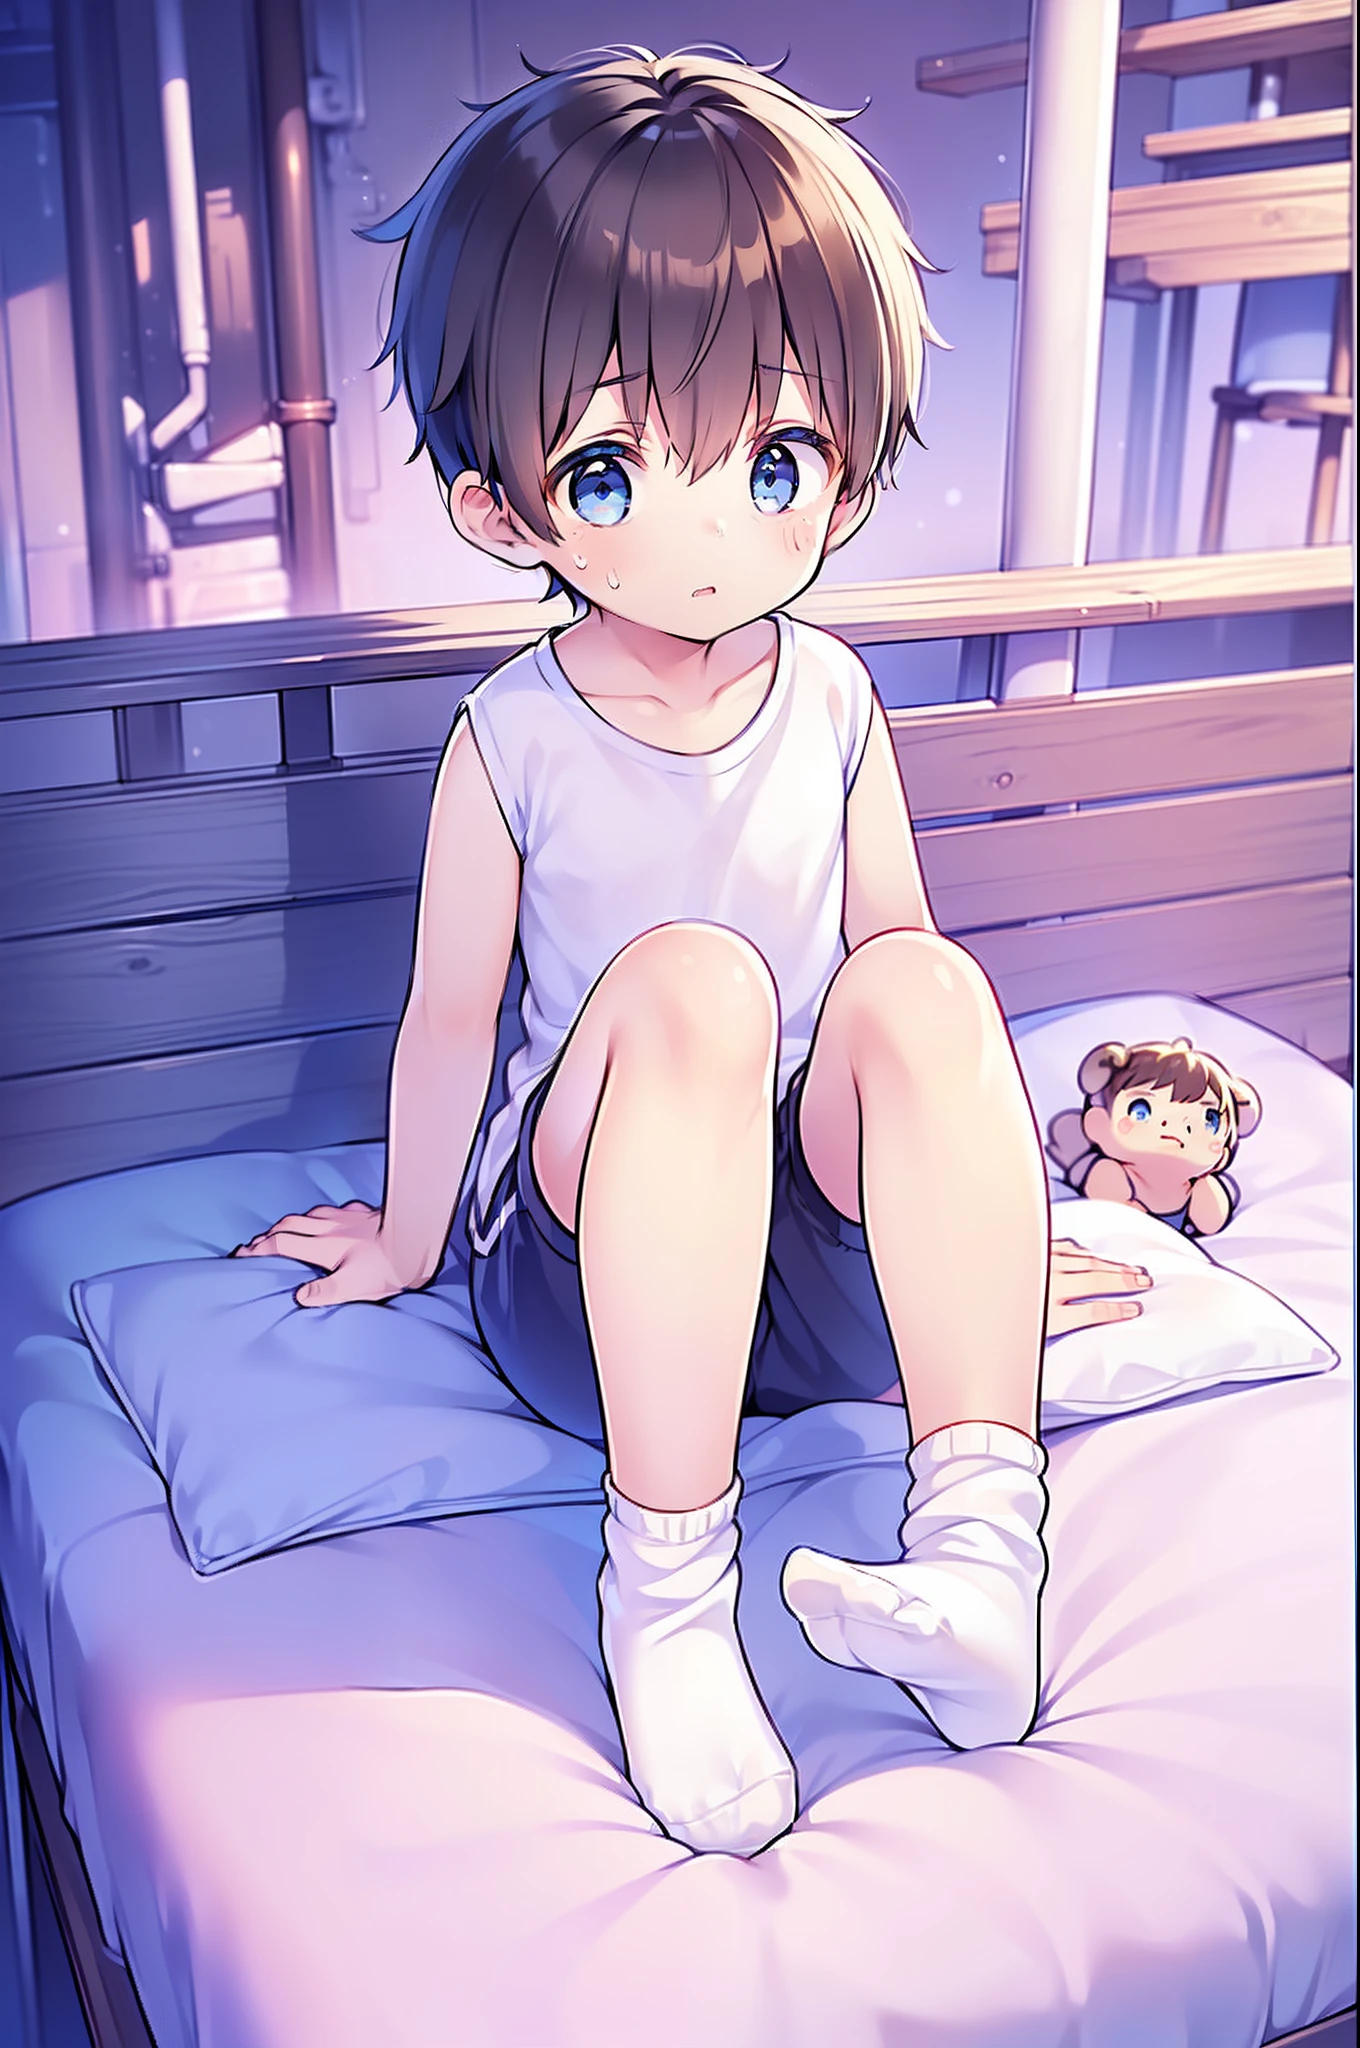 Shota Little Boy White Head, arms, body, legs with bluish black pattern, whole body, eyes and pupils blue, feet, (Young:1.4), (Child:1.4), (Shota:1.8), (male:1.8), (boy:1.9), NegfeetV2, (blue eyes:1.6), (brown hair:1.6), (short hair:1.7), (feet in focus:1.2), (socks:1.6), (laying on bed:1.4), (foot:1.4), (sweatpants:1.4),